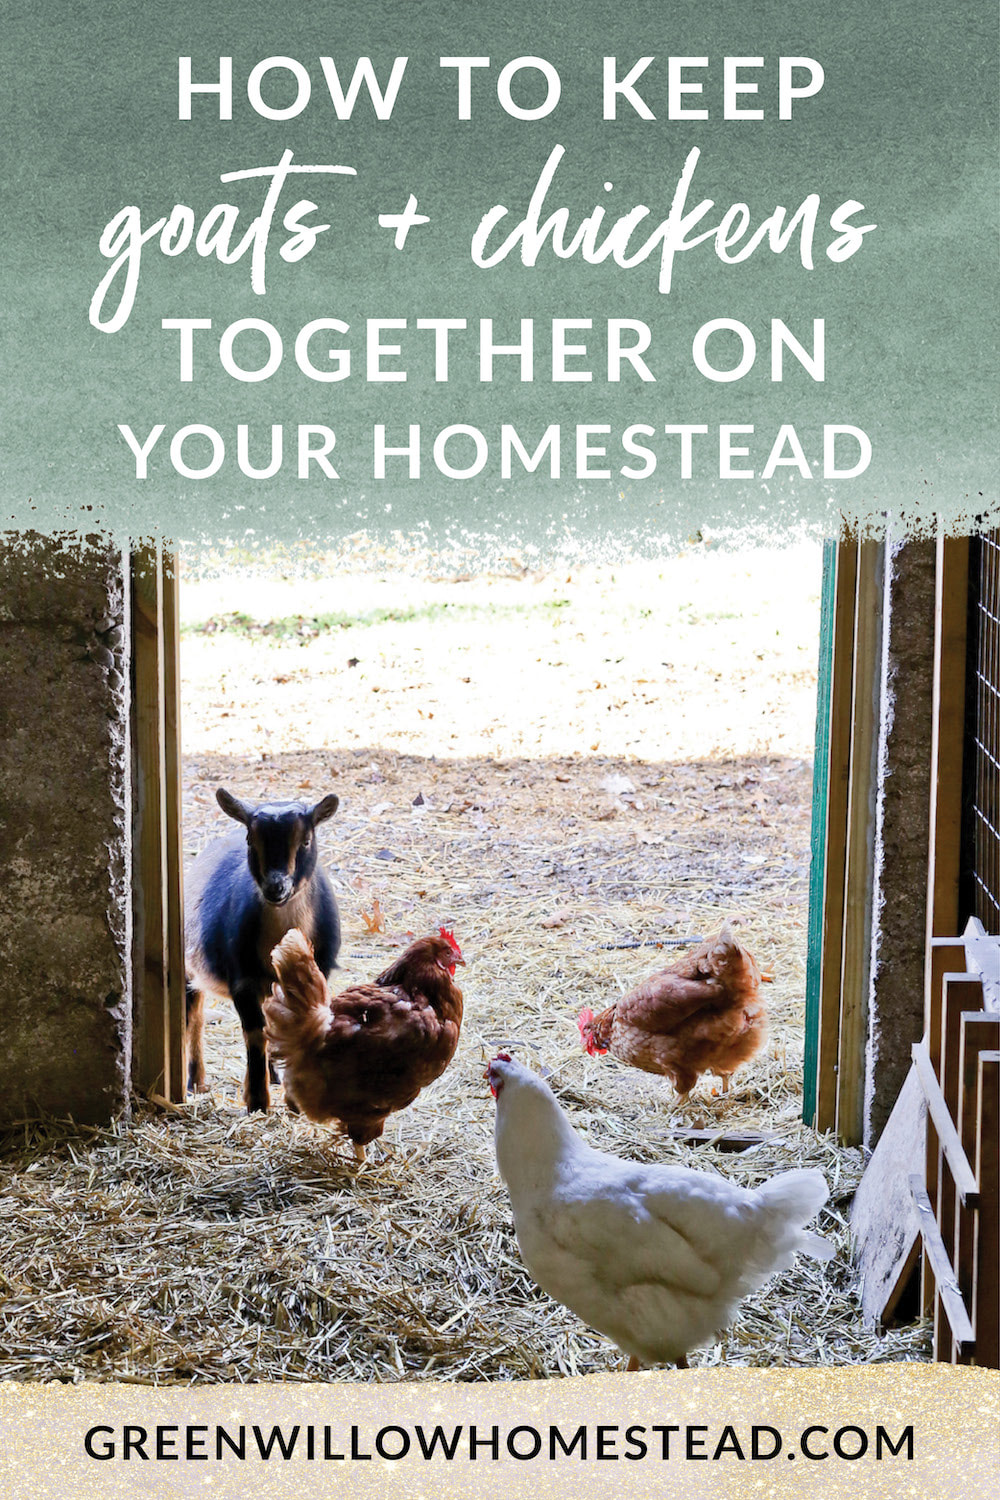 How to keep goats and chickens together on your homestead